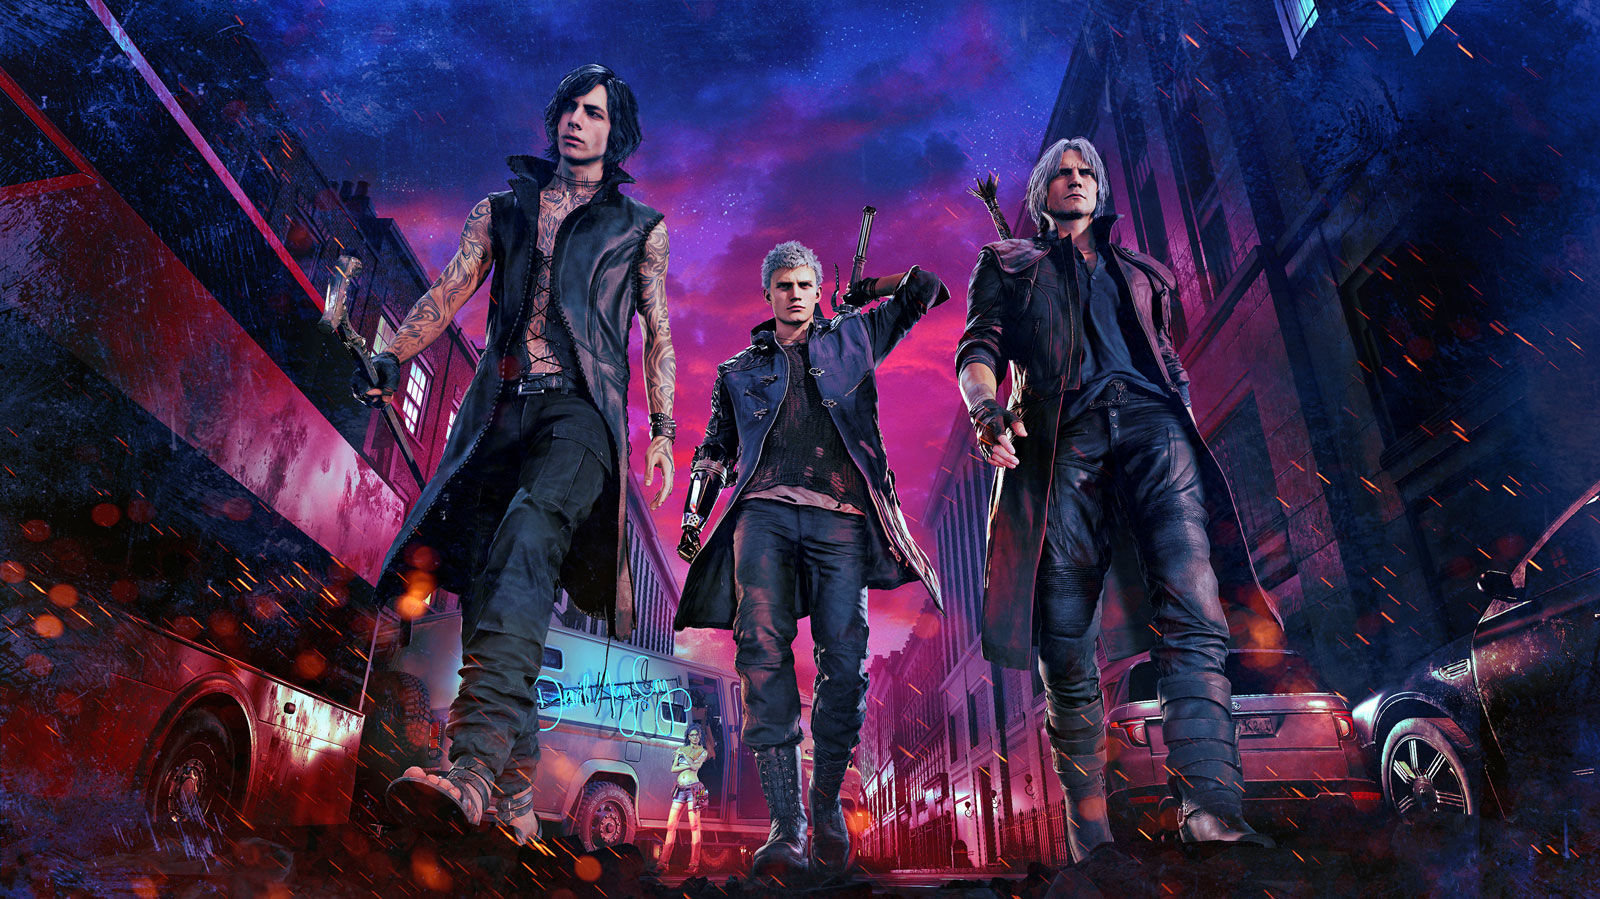 Devil May Cry 5 is coming!